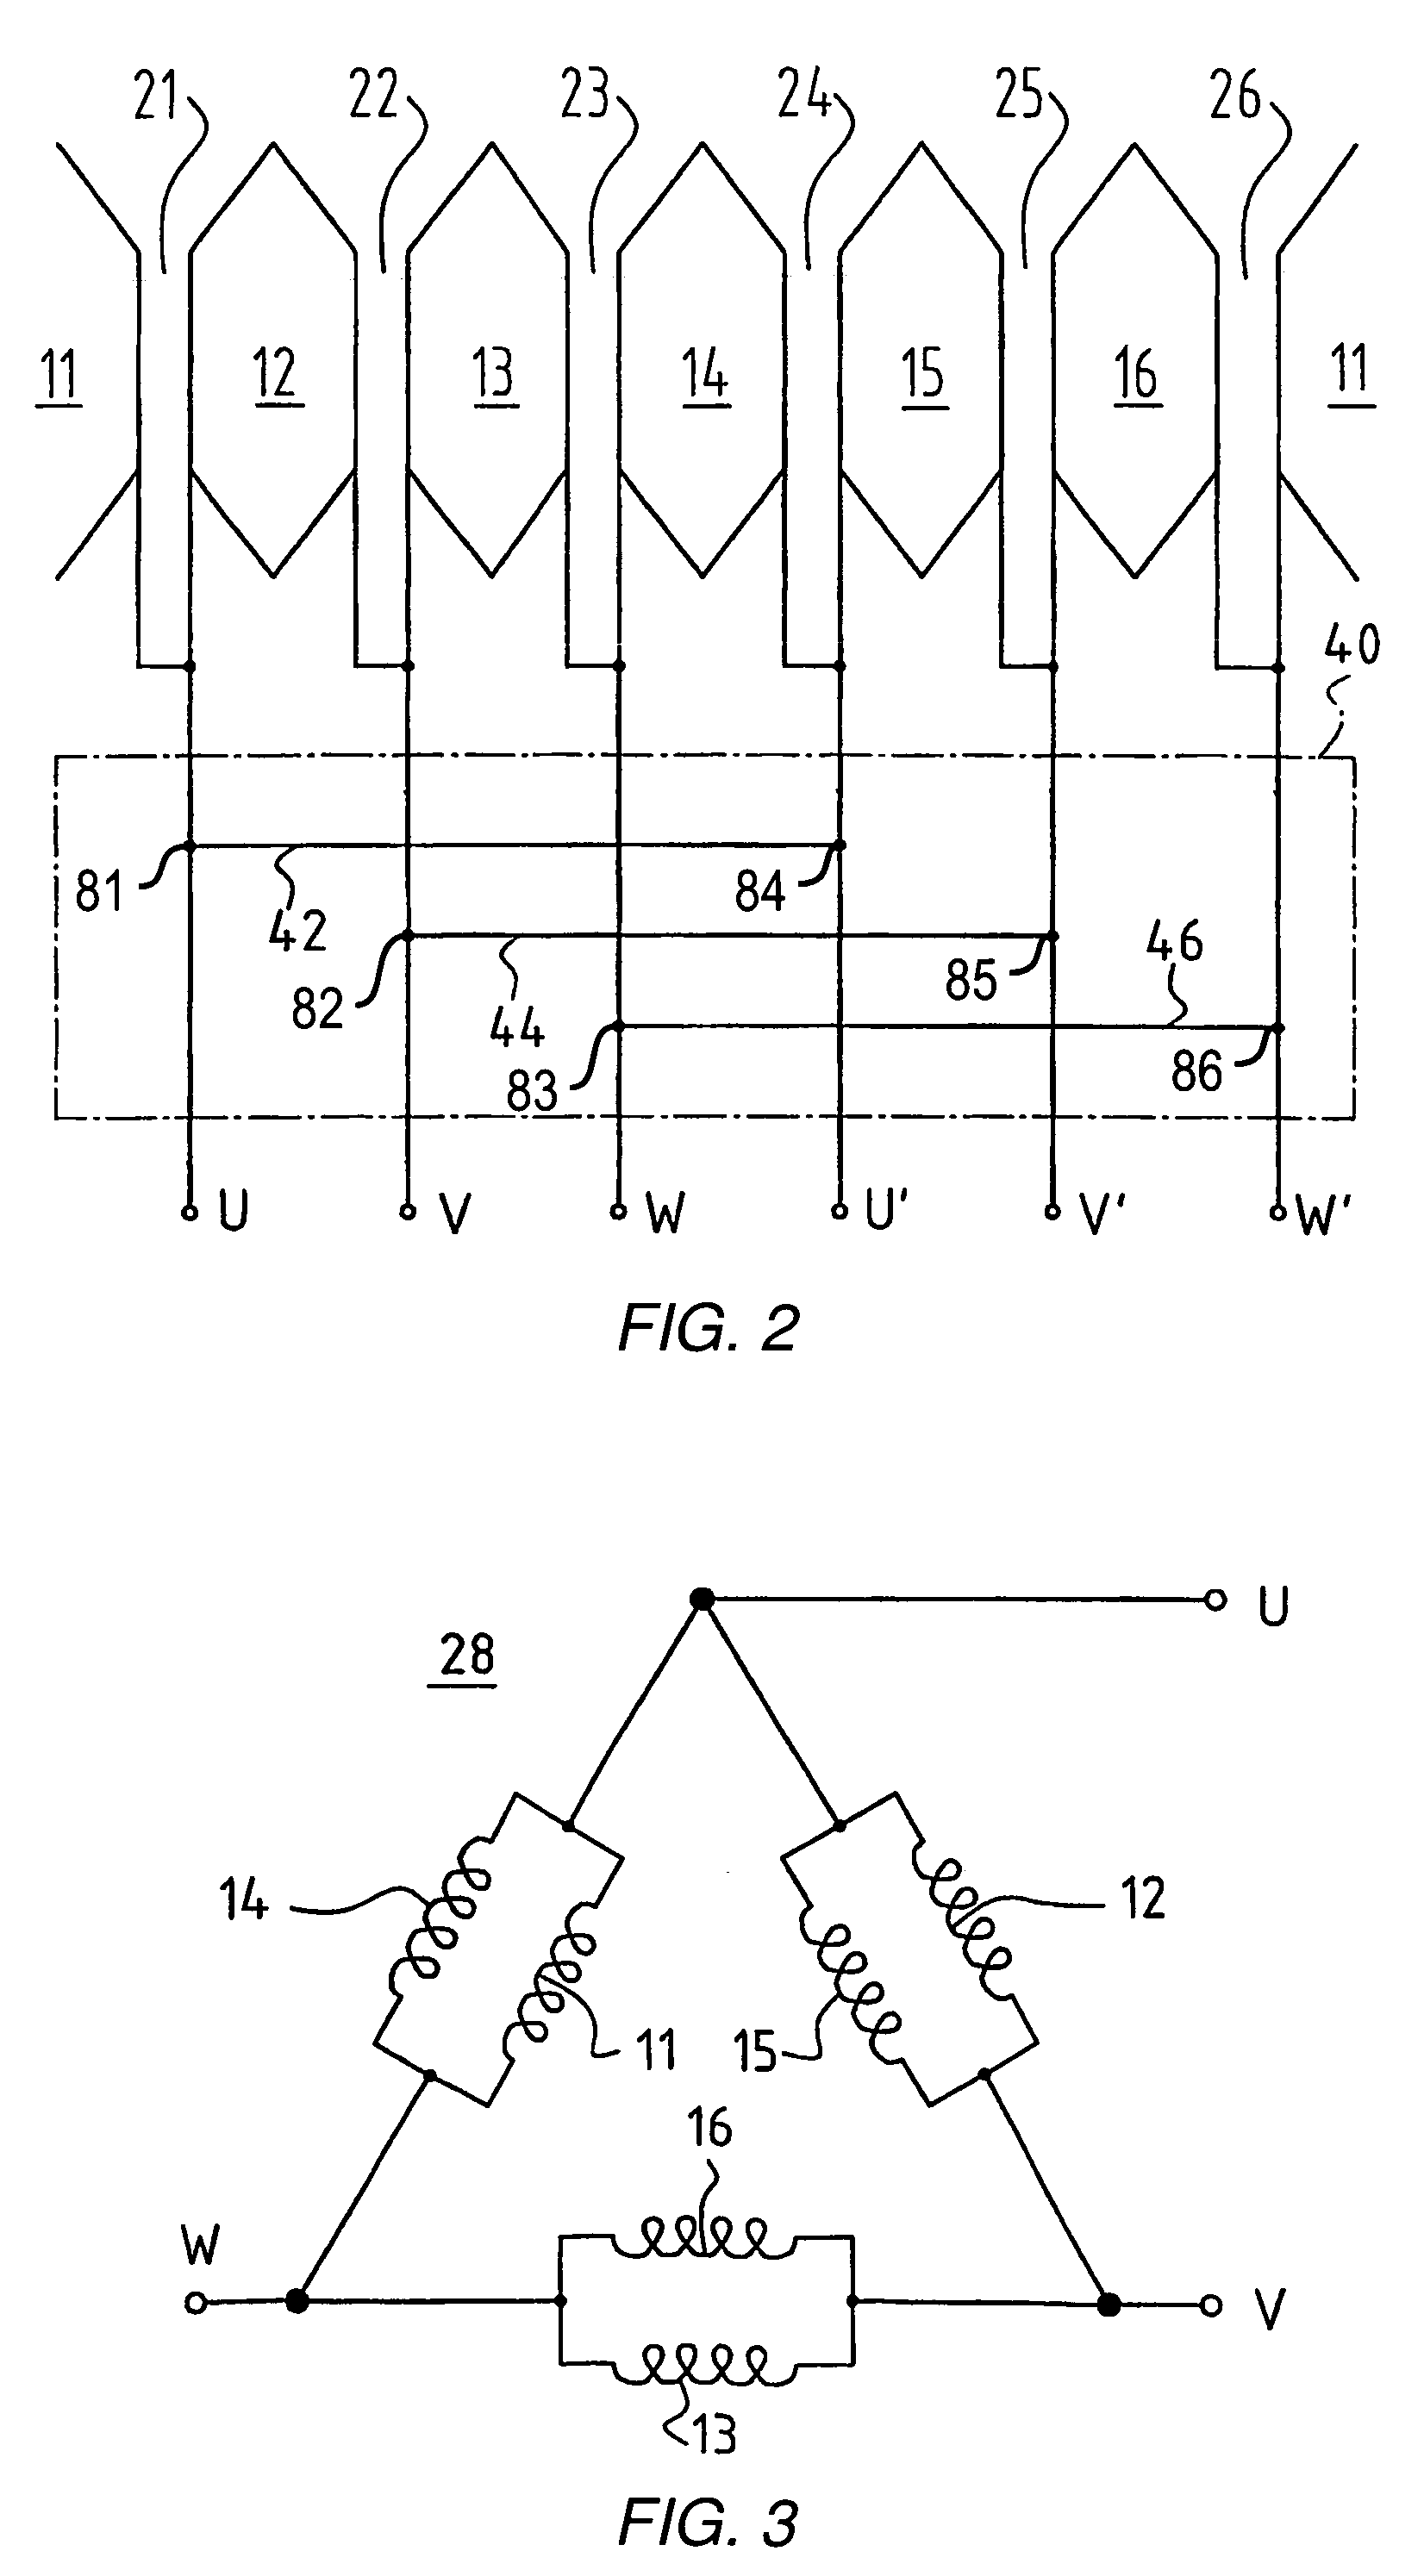 Electric motor having electrical connecting elements for connection to winding leads